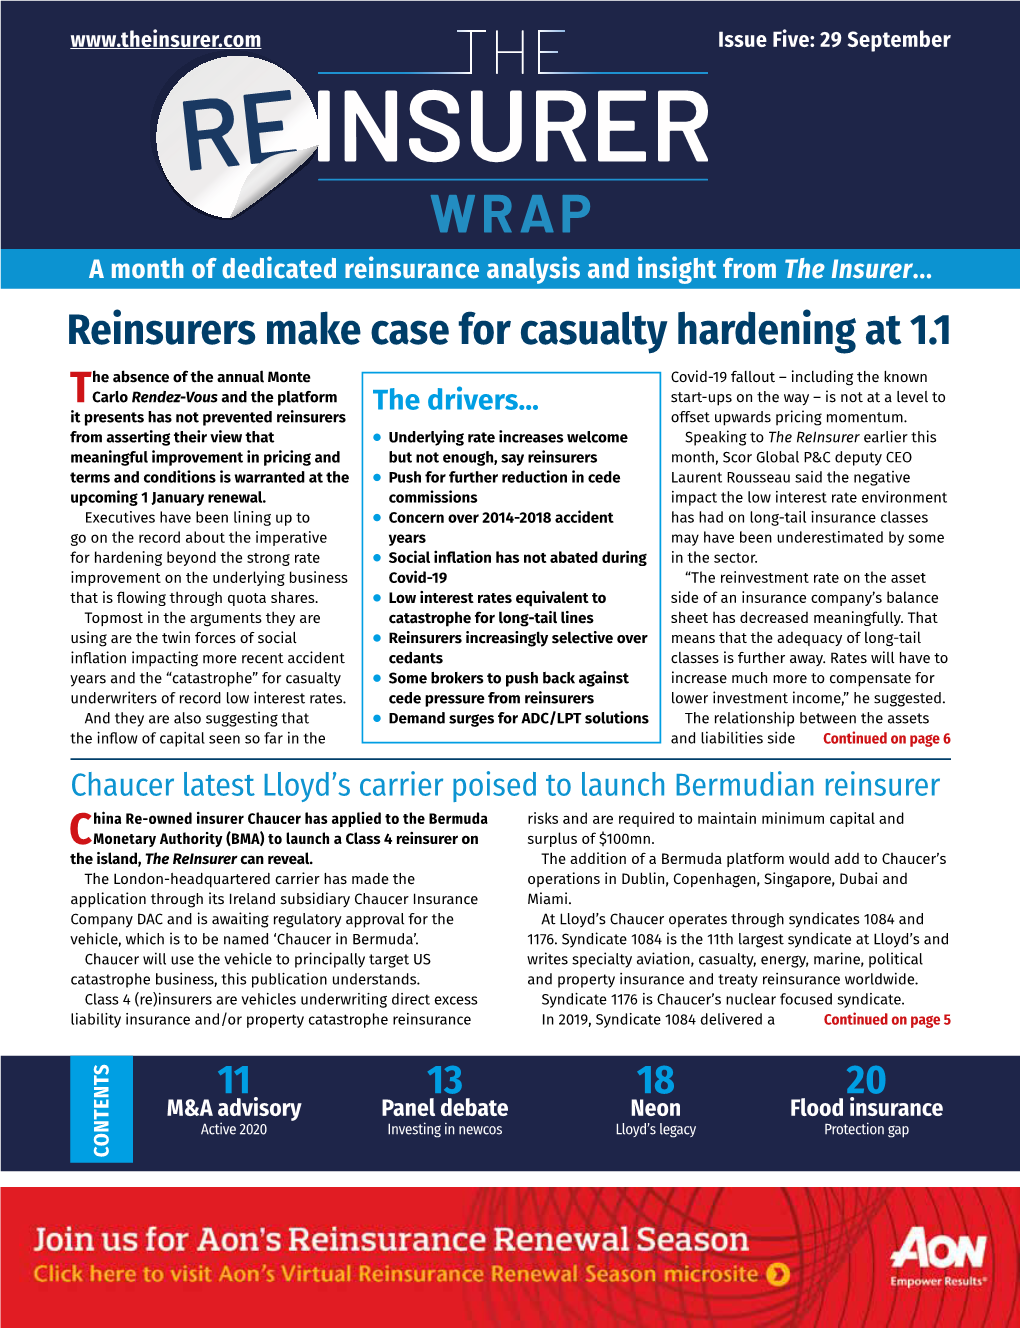 Reinsurers Make Case for Casualty Hardening At